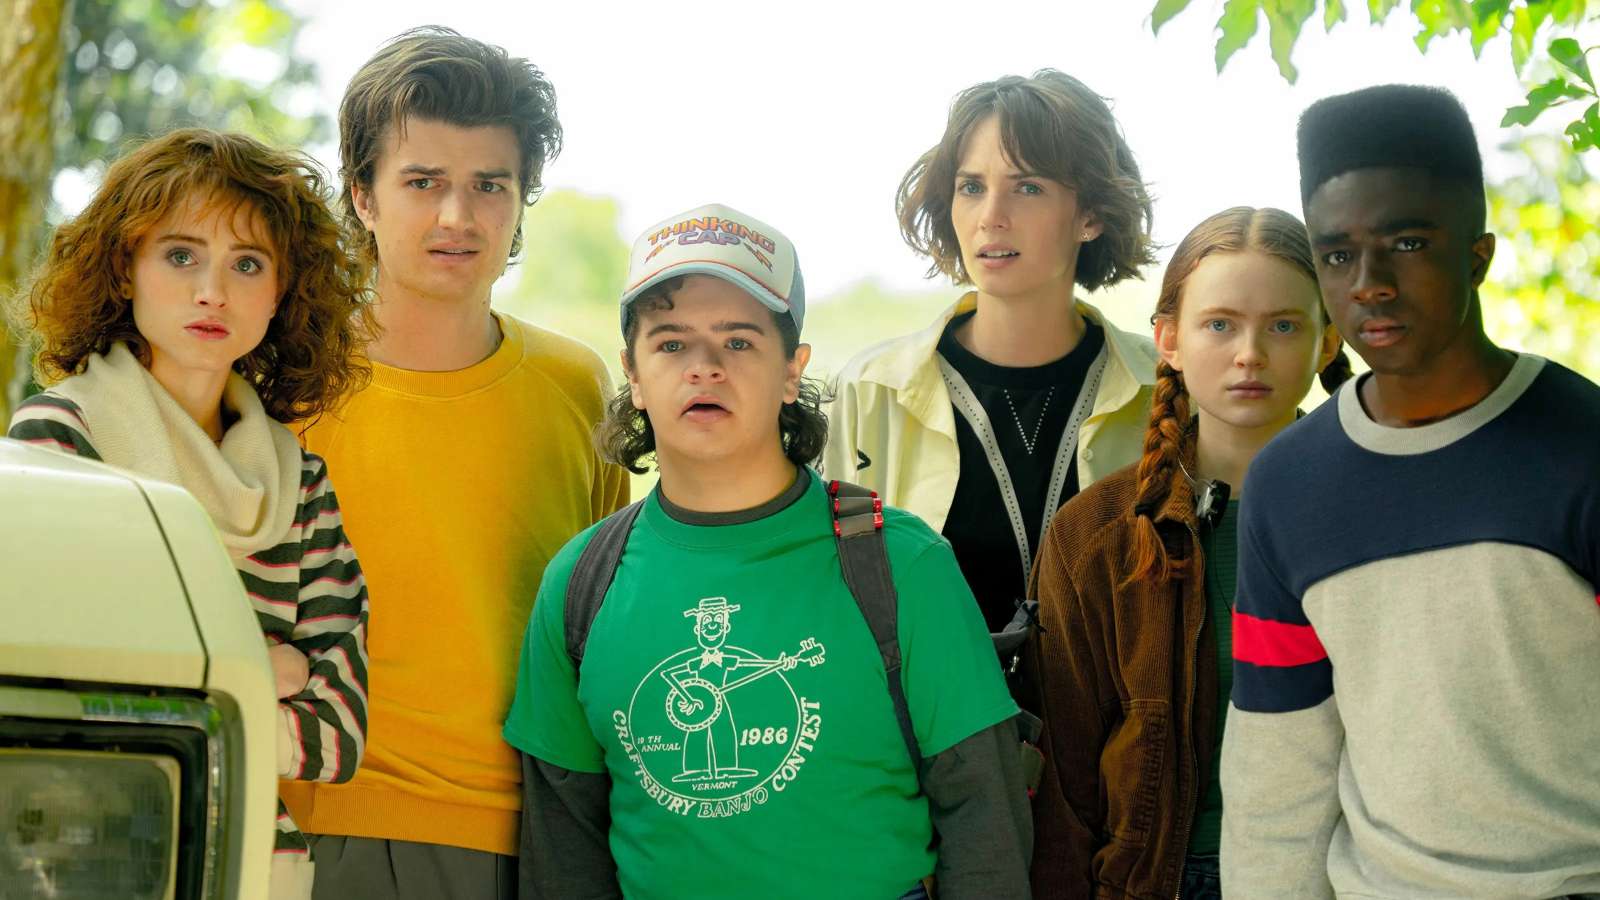 The cast of stranger things standing together outside and looking towards the camera in shock